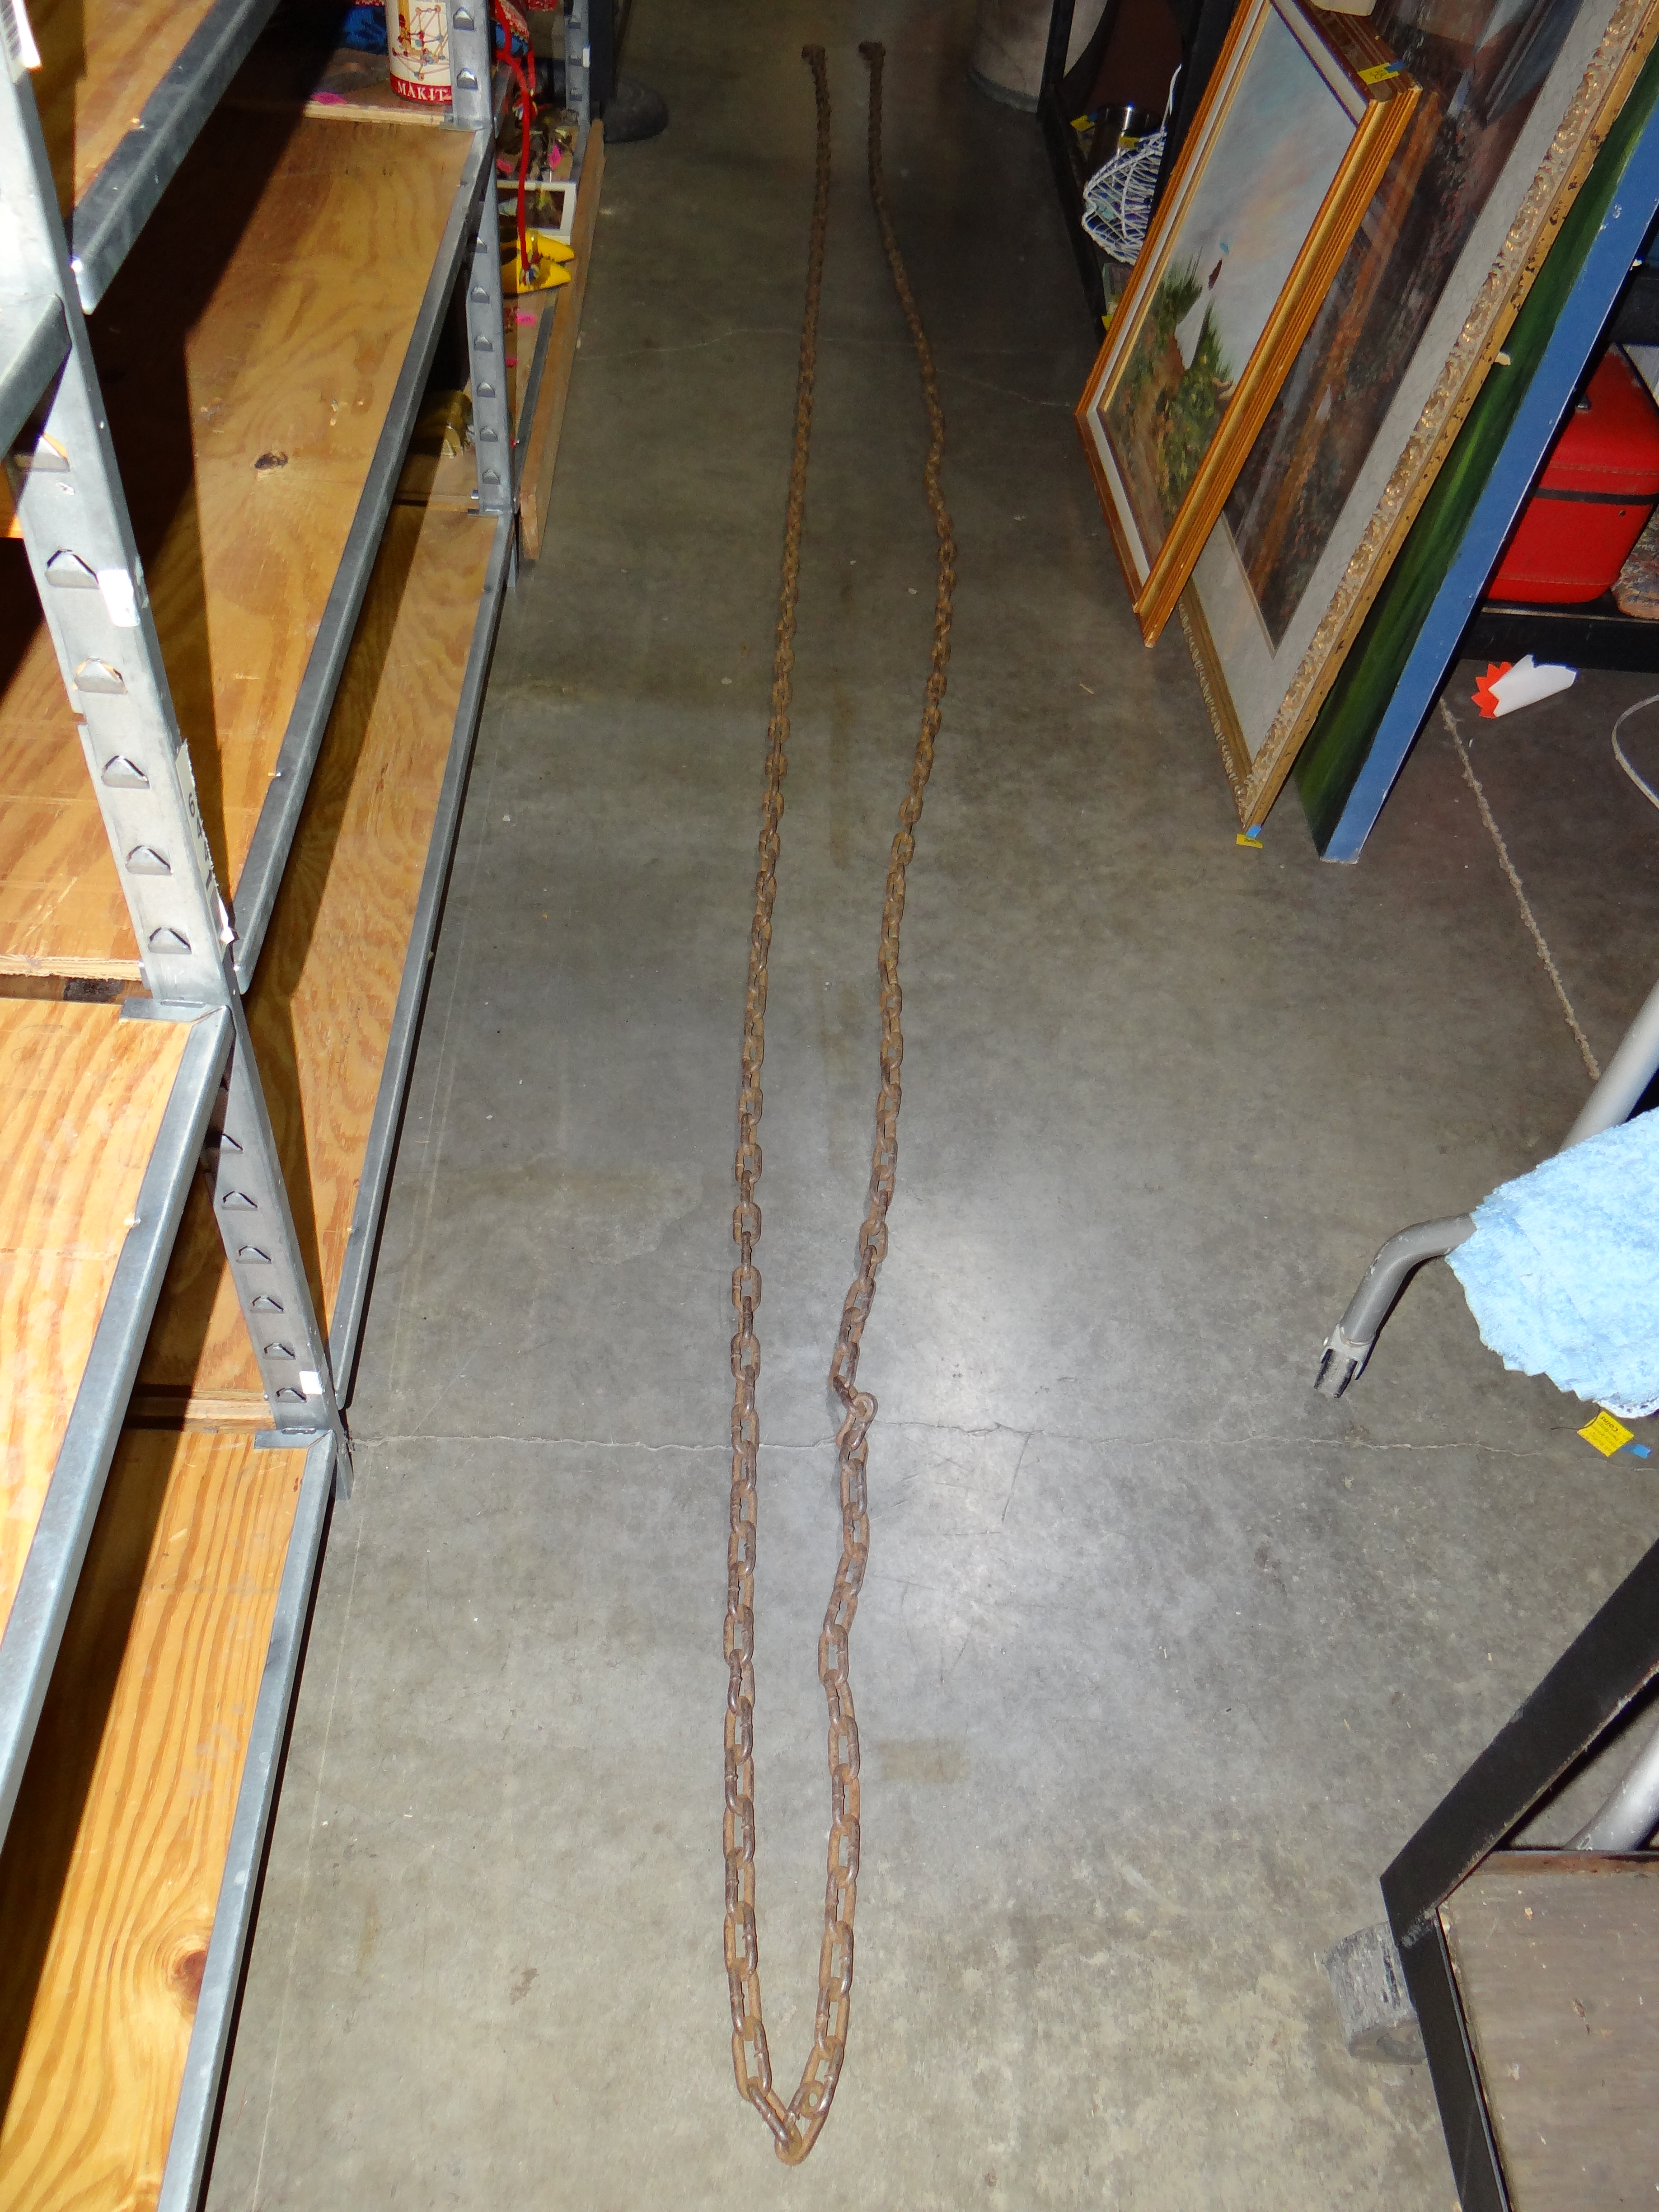 CH108-LONG Chain w/ Hooks on Both Ends Approx 24ft Long